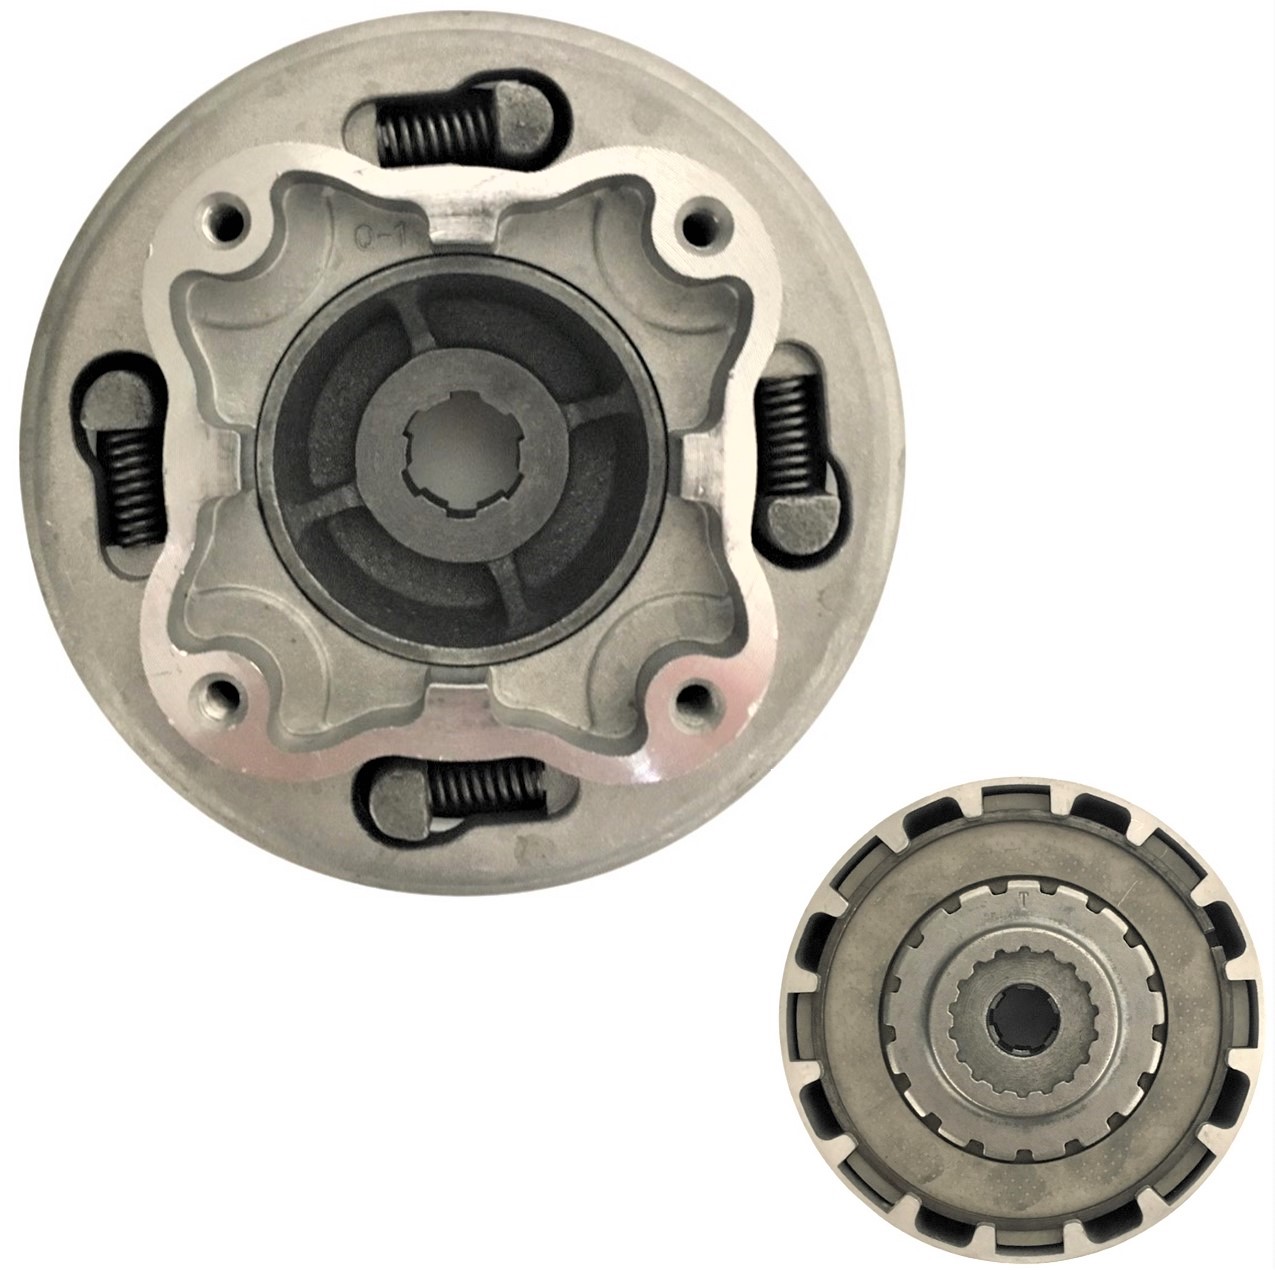 Rear Clutch 50-125cc Honda Copy Manual Clutch Fits Most Chinese ATVs, Dirtbikes Clutch OD=116 Shaft=17mm 18th Gear - Click Image to Close